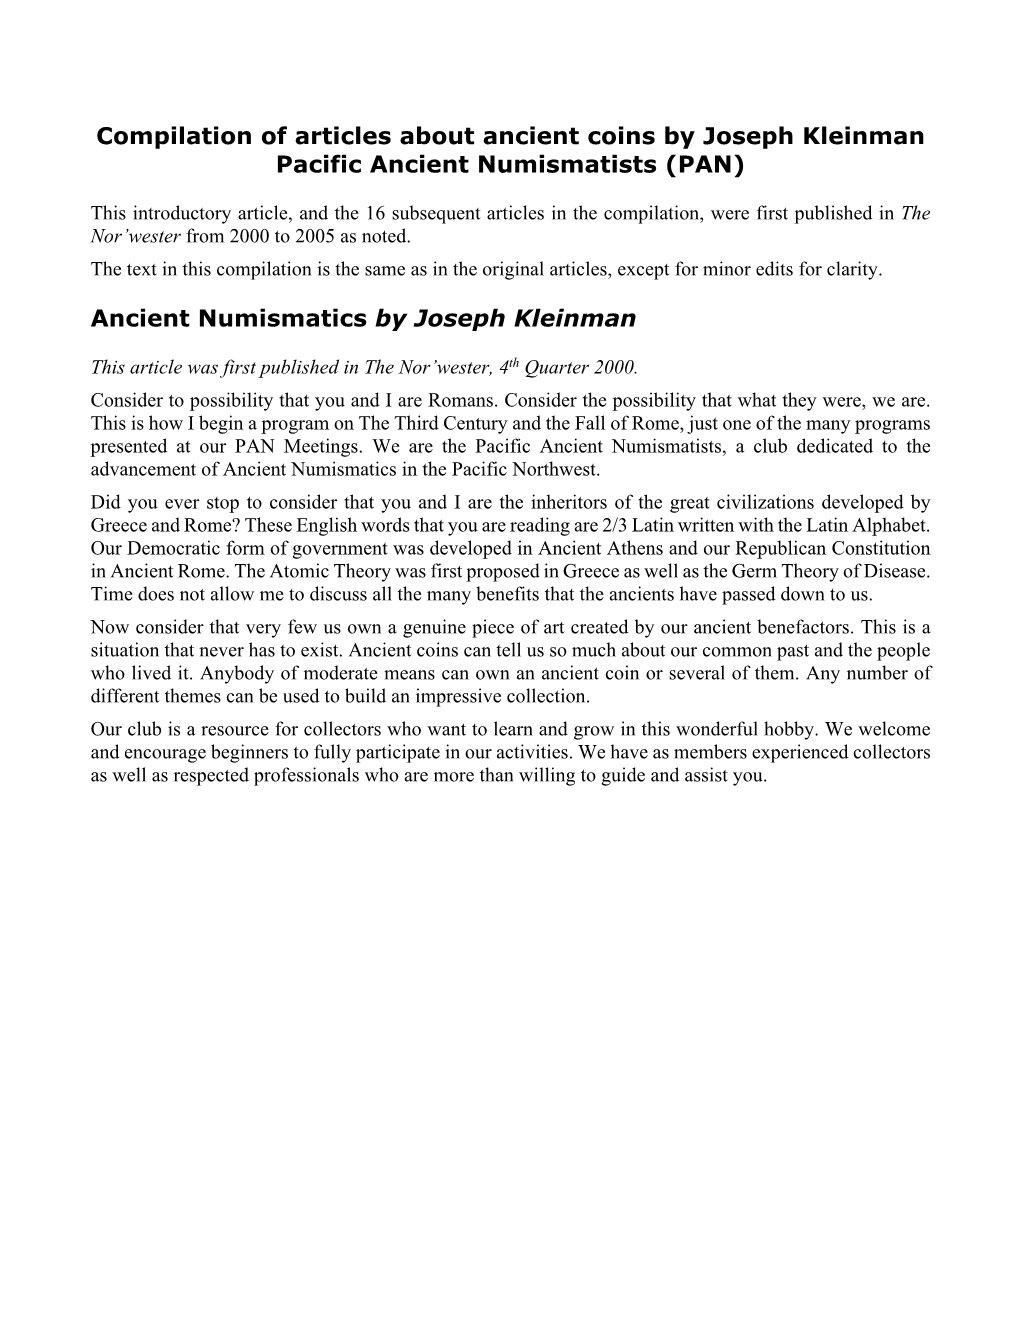 Compilation of Articles About Ancient Coins by Joseph Kleinman Pacific Ancient Numismatists (PAN)